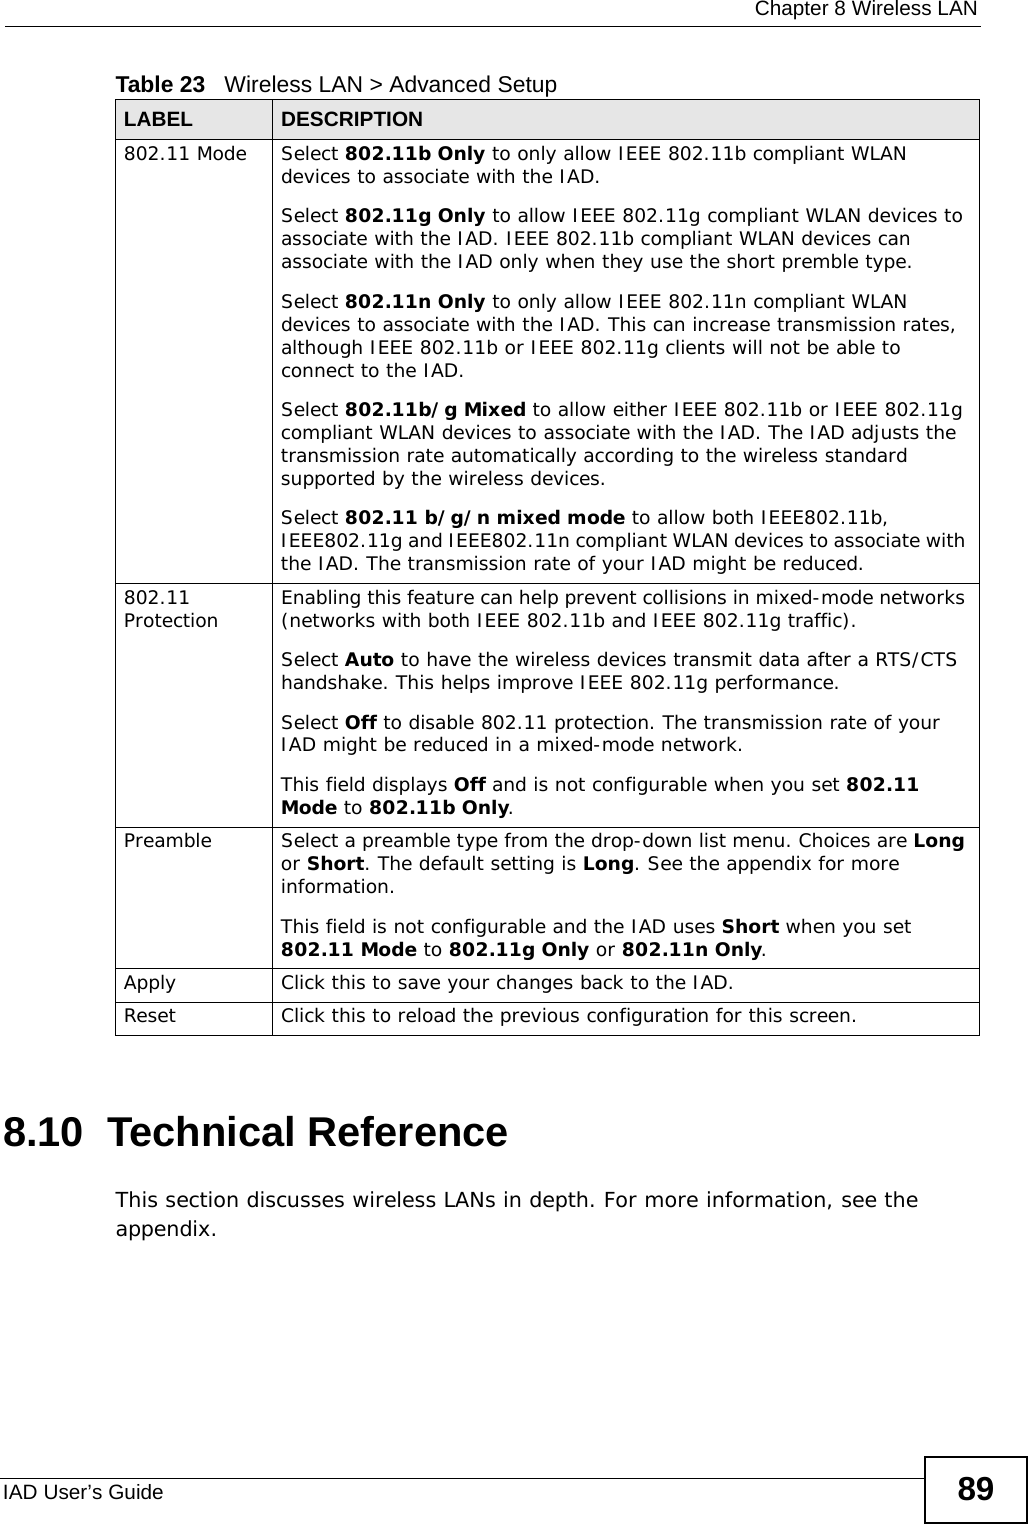  Chapter 8 Wireless LANIAD User’s Guide 898.10  Technical ReferenceThis section discusses wireless LANs in depth. For more information, see the appendix.802.11 Mode Select 802.11b Only to only allow IEEE 802.11b compliant WLAN devices to associate with the IAD. Select 802.11g Only to allow IEEE 802.11g compliant WLAN devices to associate with the IAD. IEEE 802.11b compliant WLAN devices can associate with the IAD only when they use the short premble type.Select 802.11n Only to only allow IEEE 802.11n compliant WLAN devices to associate with the IAD. This can increase transmission rates, although IEEE 802.11b or IEEE 802.11g clients will not be able to connect to the IAD.Select 802.11b/g Mixed to allow either IEEE 802.11b or IEEE 802.11g compliant WLAN devices to associate with the IAD. The IAD adjusts the transmission rate automatically according to the wireless standard supported by the wireless devices.Select 802.11 b/g/n mixed mode to allow both IEEE802.11b, IEEE802.11g and IEEE802.11n compliant WLAN devices to associate with the IAD. The transmission rate of your IAD might be reduced.802.11 Protection Enabling this feature can help prevent collisions in mixed-mode networks (networks with both IEEE 802.11b and IEEE 802.11g traffic).Select Auto to have the wireless devices transmit data after a RTS/CTS handshake. This helps improve IEEE 802.11g performance.Select Off to disable 802.11 protection. The transmission rate of your IAD might be reduced in a mixed-mode network.This field displays Off and is not configurable when you set 802.11 Mode to 802.11b Only.Preamble Select a preamble type from the drop-down list menu. Choices are Long or Short. The default setting is Long. See the appendix for more information.This field is not configurable and the IAD uses Short when you set 802.11 Mode to 802.11g Only or 802.11n Only.Apply Click this to save your changes back to the IAD.Reset Click this to reload the previous configuration for this screen.Table 23   Wireless LAN &gt; Advanced SetupLABEL DESCRIPTION